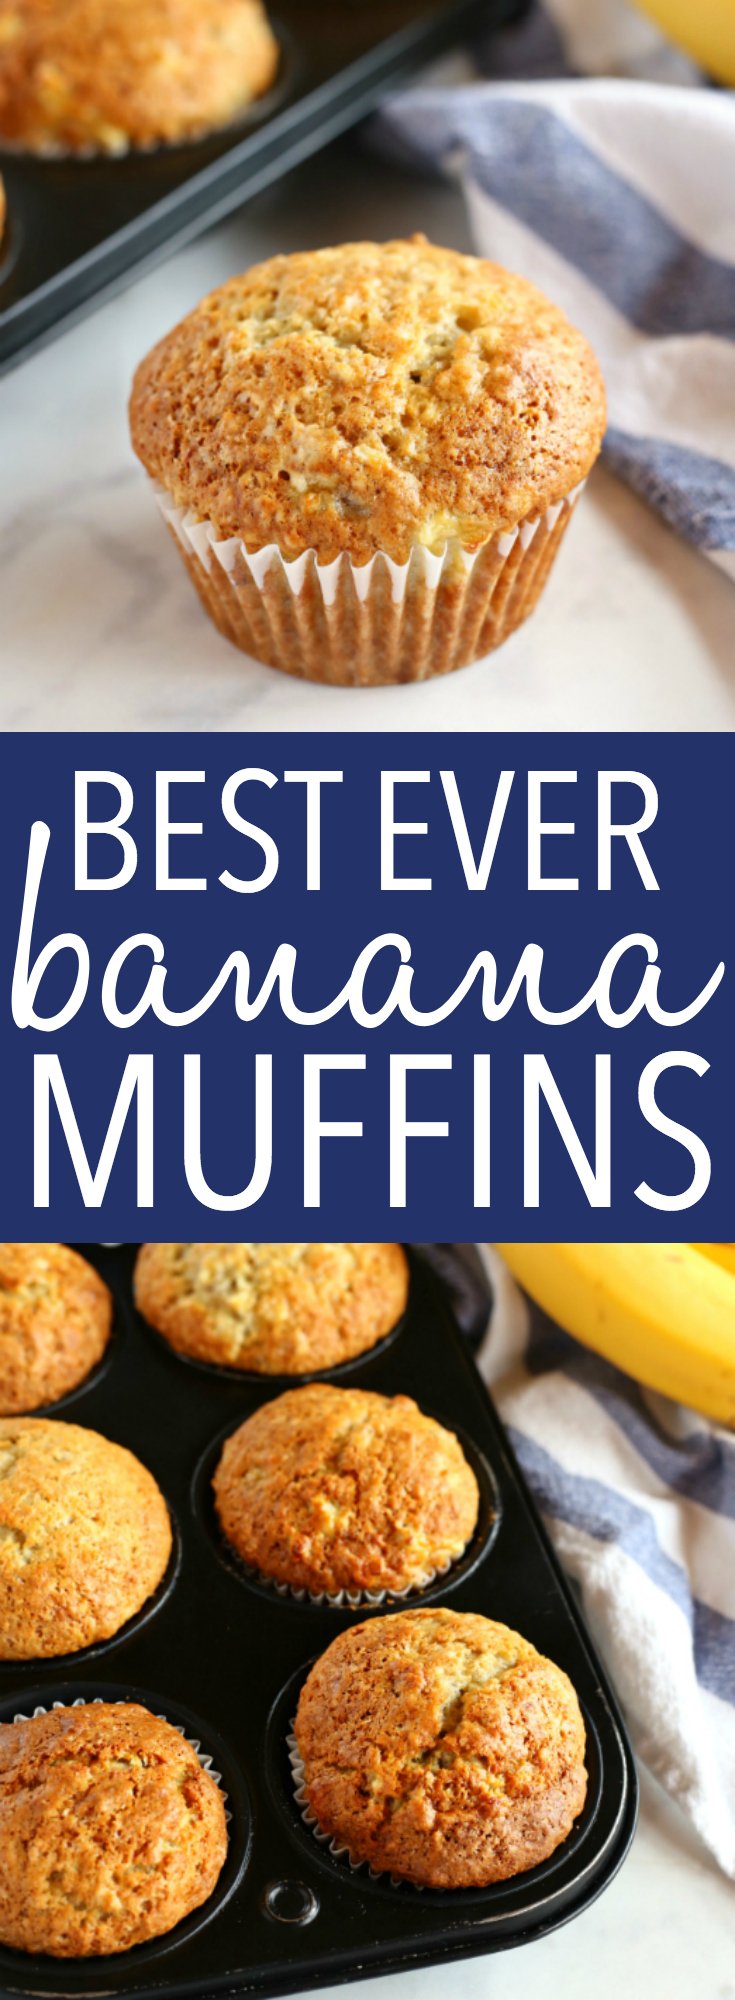 These Best Ever Banana Muffins are the best banana muffins you'll ever try - crispy on the outside and fluffy on the inside! And so easy to make in only one bowl! Ready in minutes! Recipe from thebusybaker.ca! #besteverbananamuffins #bestbananamuffins #bananamuffins #easymuffinrecipe via @busybakerblog